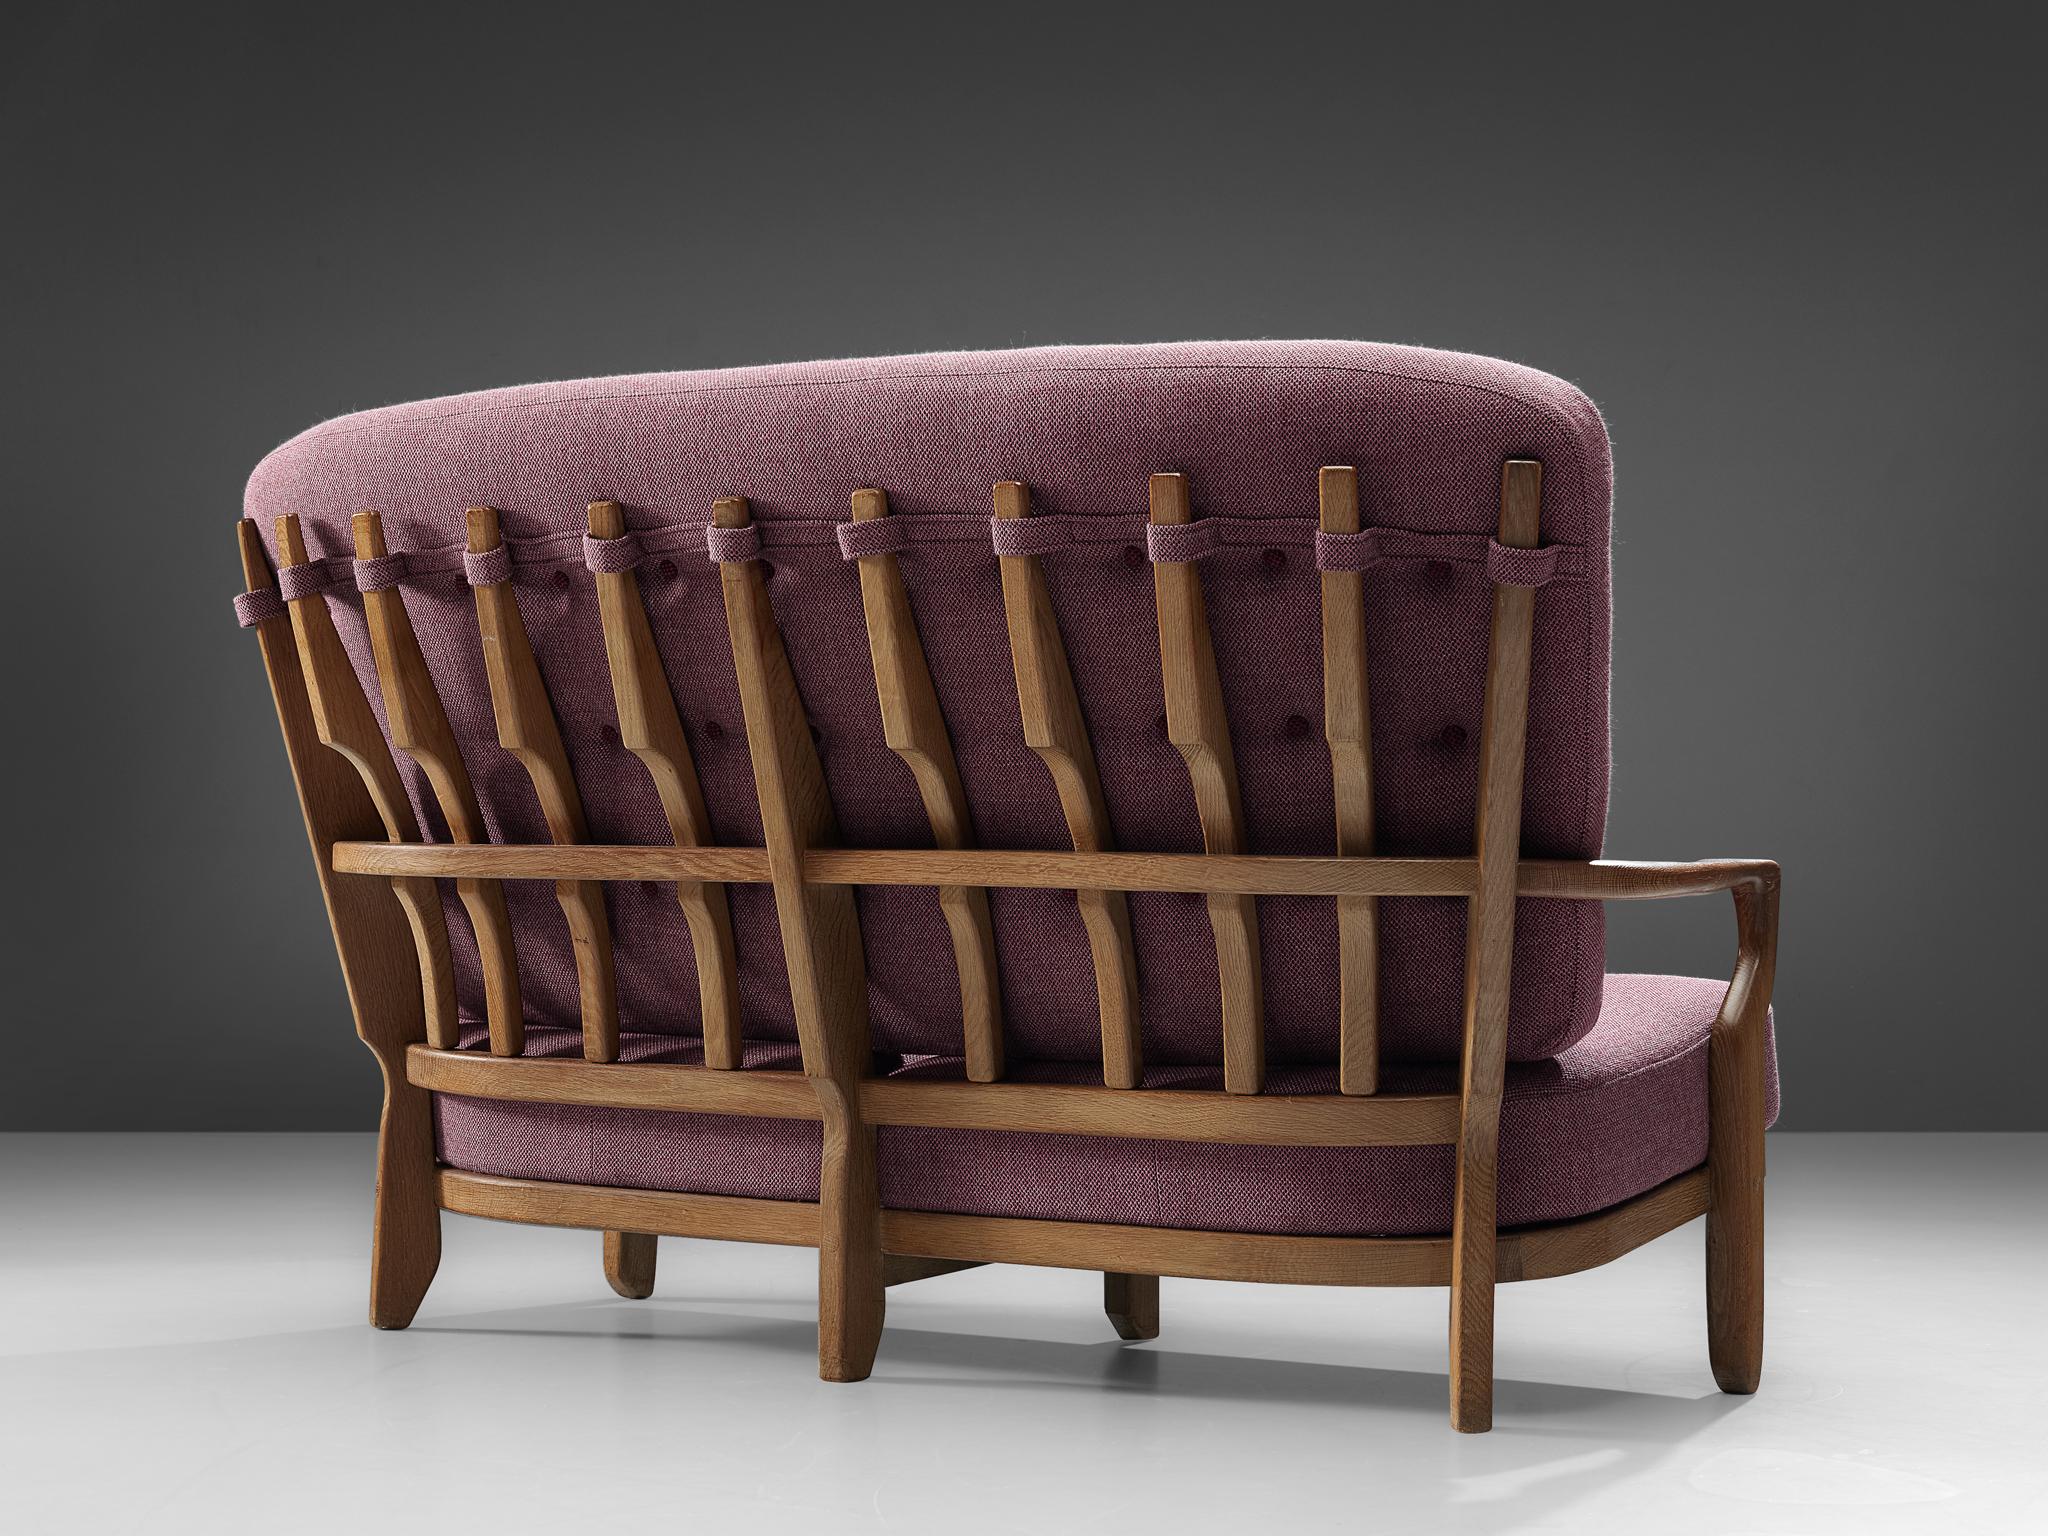 Guillerme and Chambron, sofa 'Juliette', rose fabric, oak, France, 1950s

This sculptural carved oak two-seat sofa is designed by Guillerme and Chambron. The design duo is known for their sculptural, crafted solid oak furniture. This comfortable